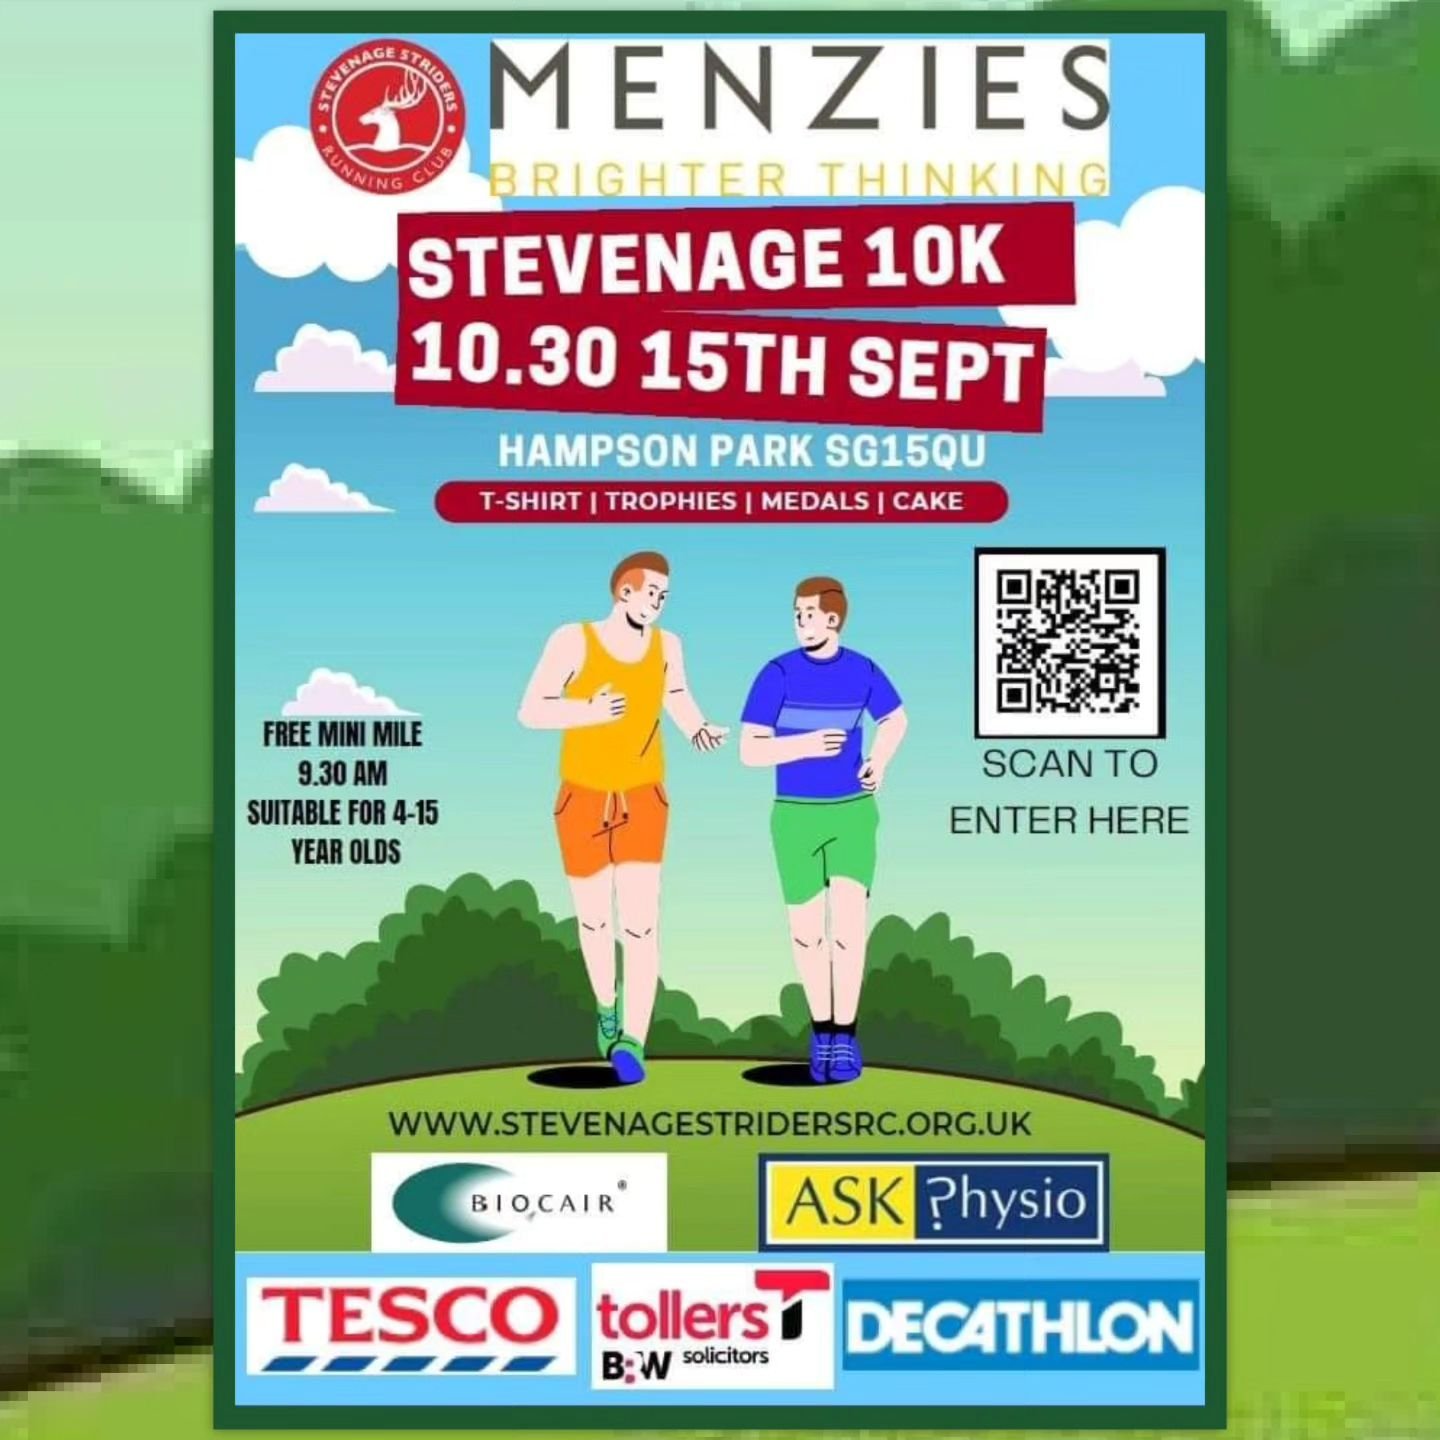 Everything is coming together now. All sponsors on board, charities in place and now the race poster is complete. 

Please feel free to share this wide and far and either scan the QR code or visit www.stevenagestridersrc.org.uk/stevenage-10k (link in